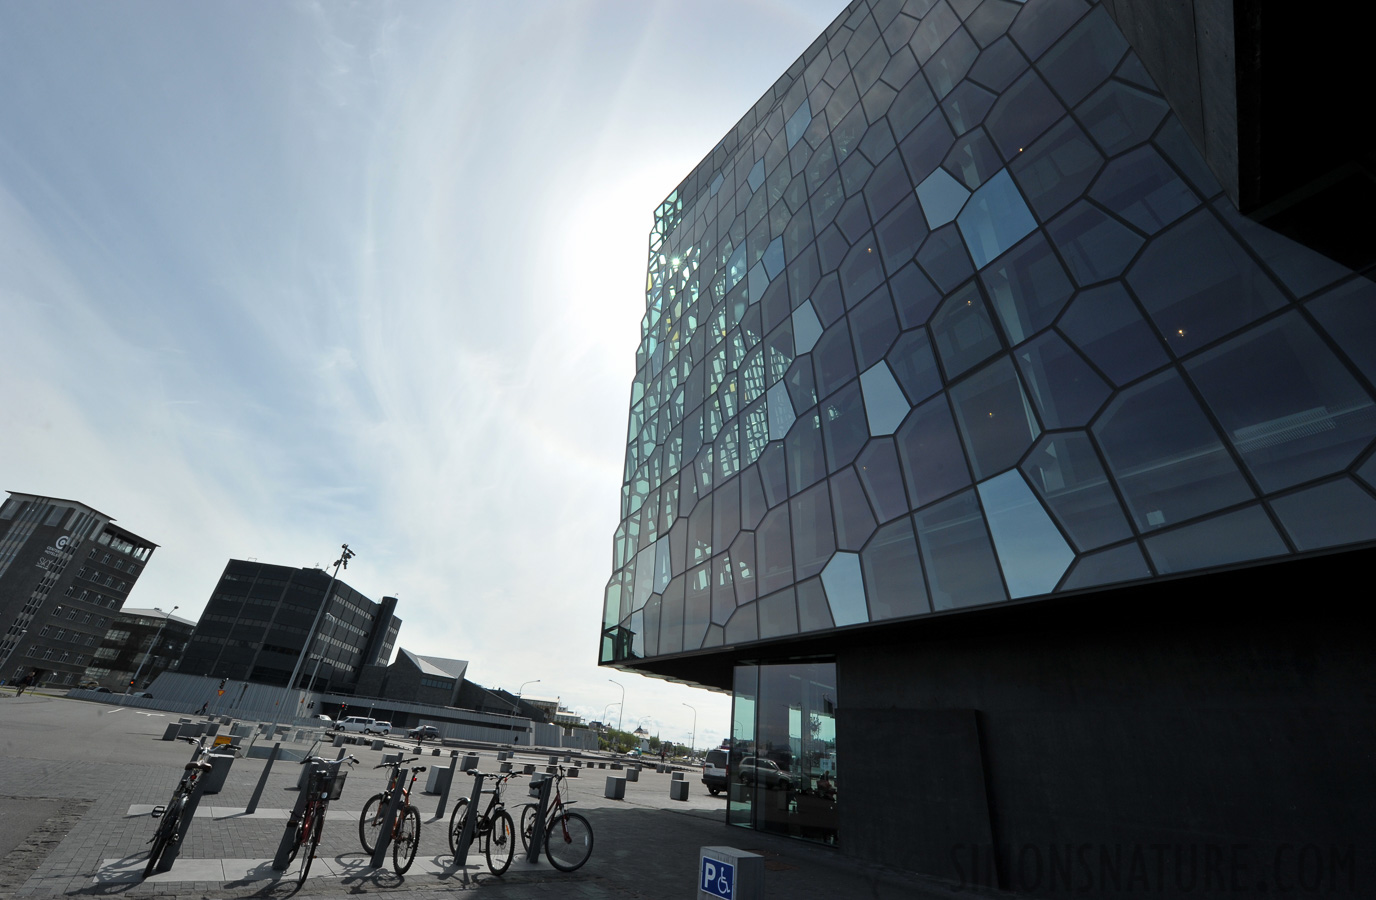 Harpa Concert Hall [14 mm, 1/400 sec at f / 18, ISO 400]